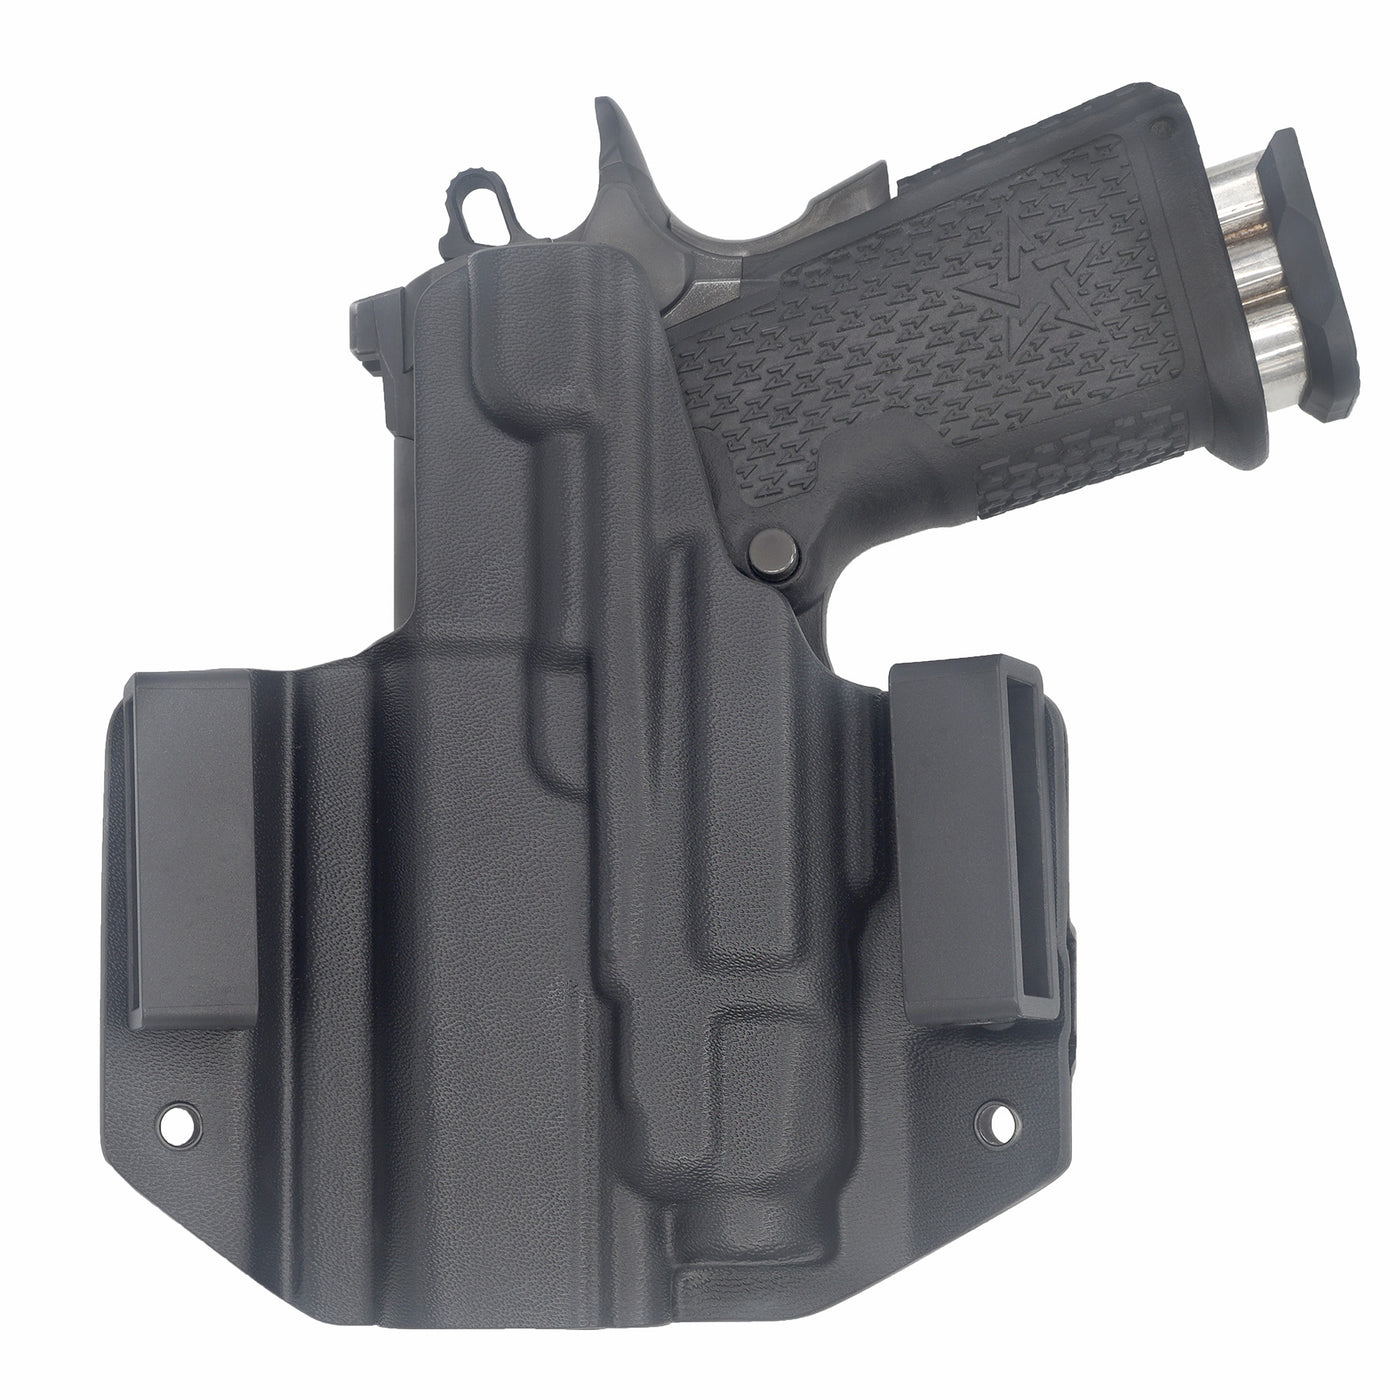 C&G Holsters custom OWB Tactical 2011 Streamlight TLR7/a in holstered position back view